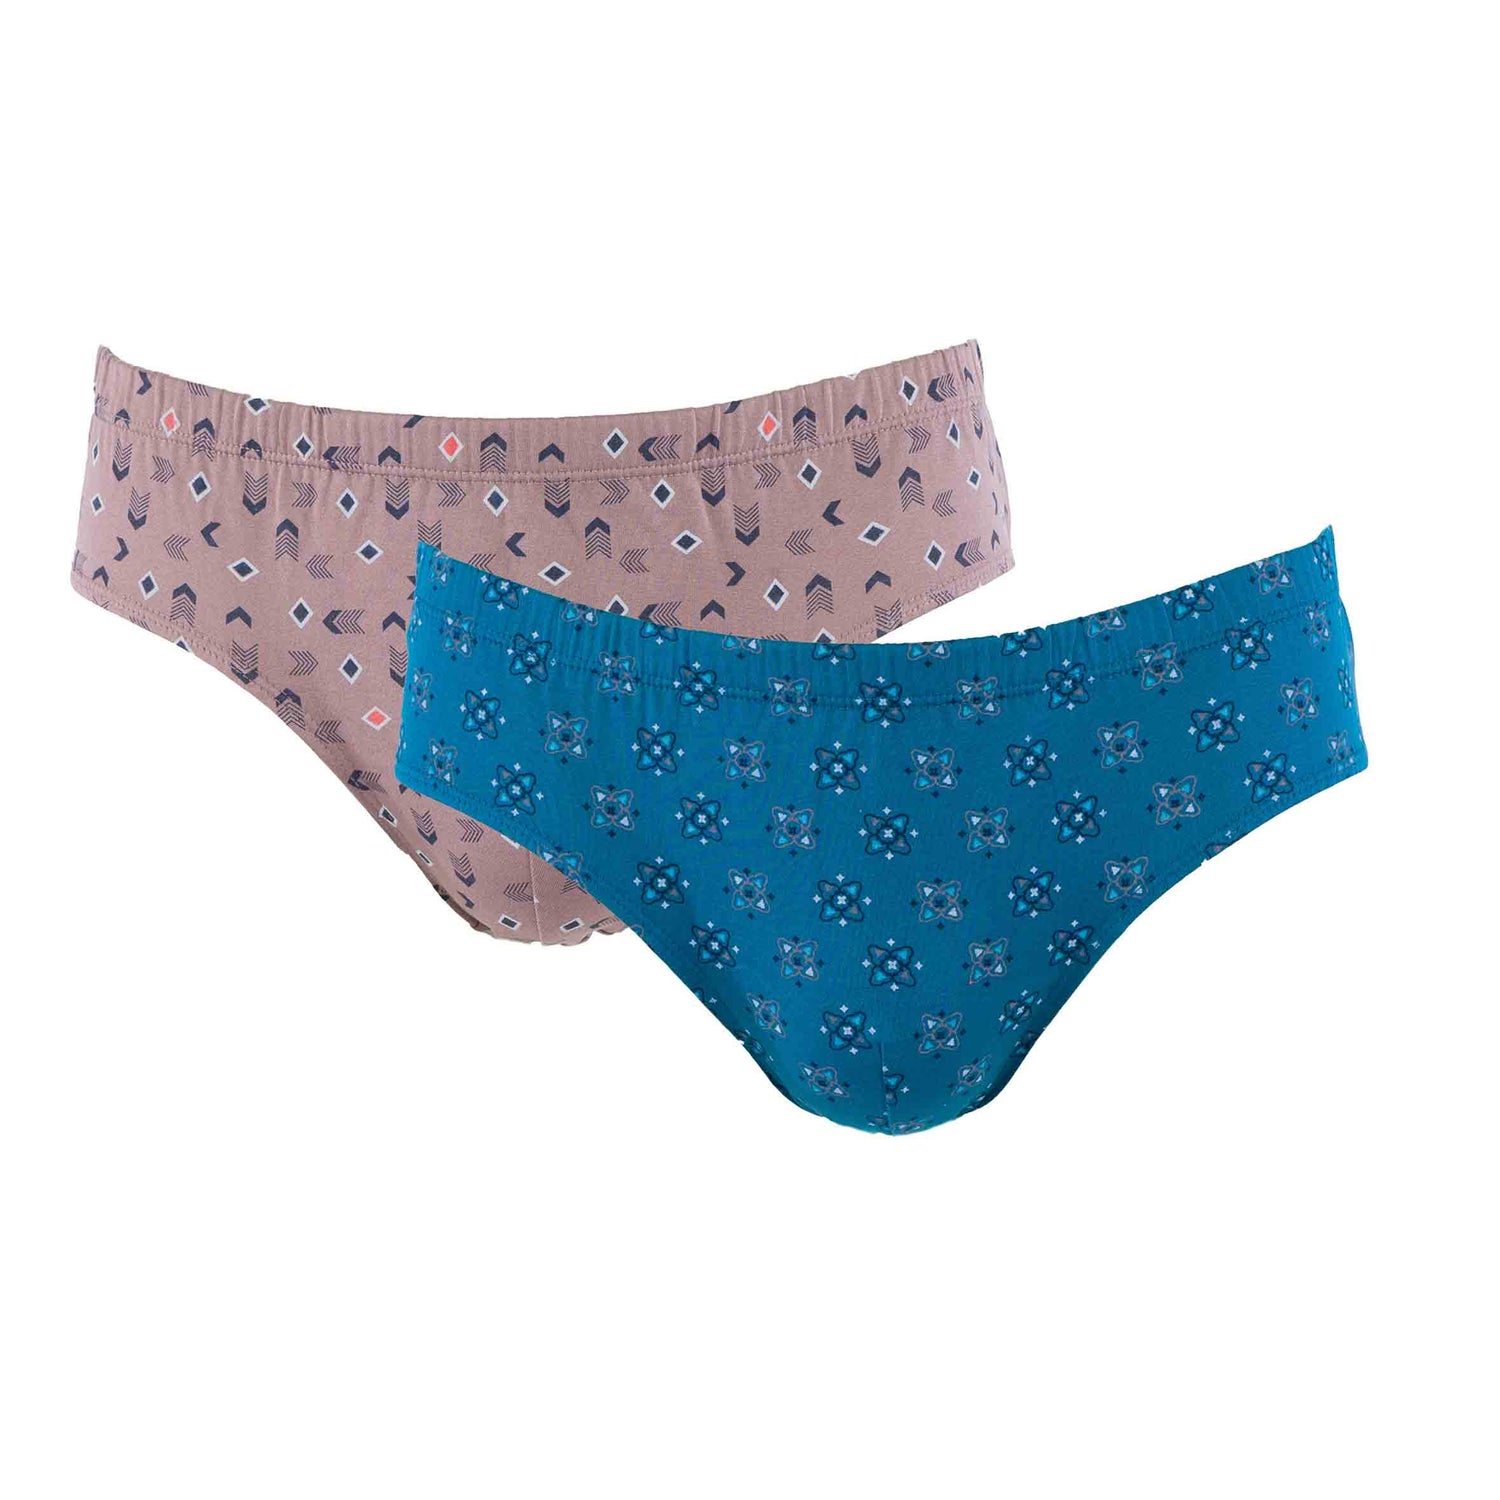 Pack of 2 Low-Rise Briefs in Petrol BLUE and MOKA Printed Mercerized Cotton Jersey